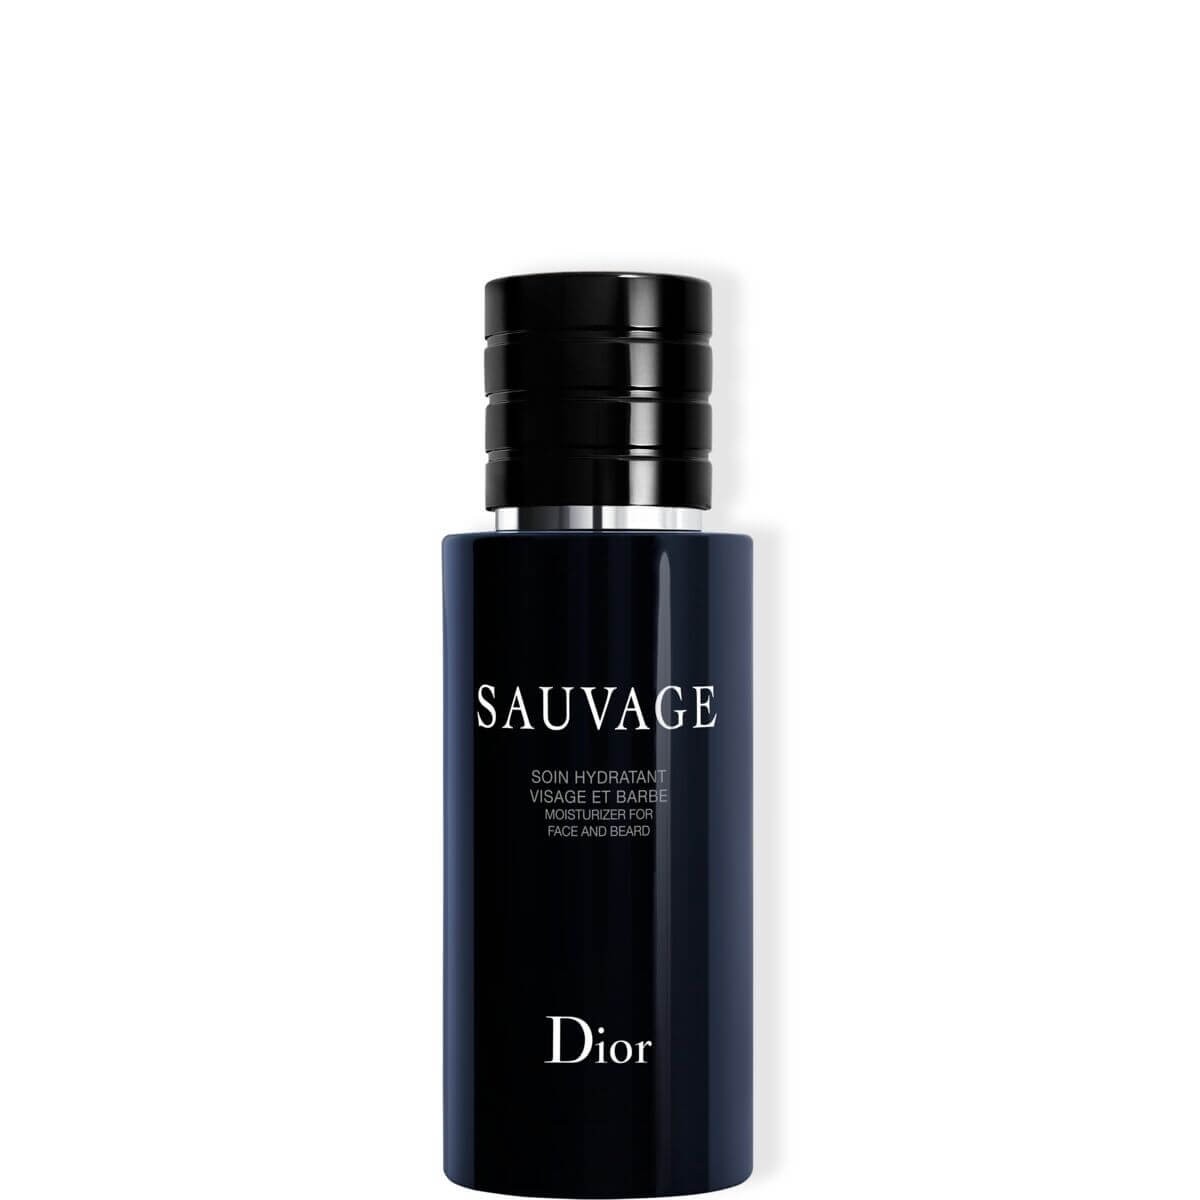 DIOR - Sauvage Moisturizer for Face and Beard - 